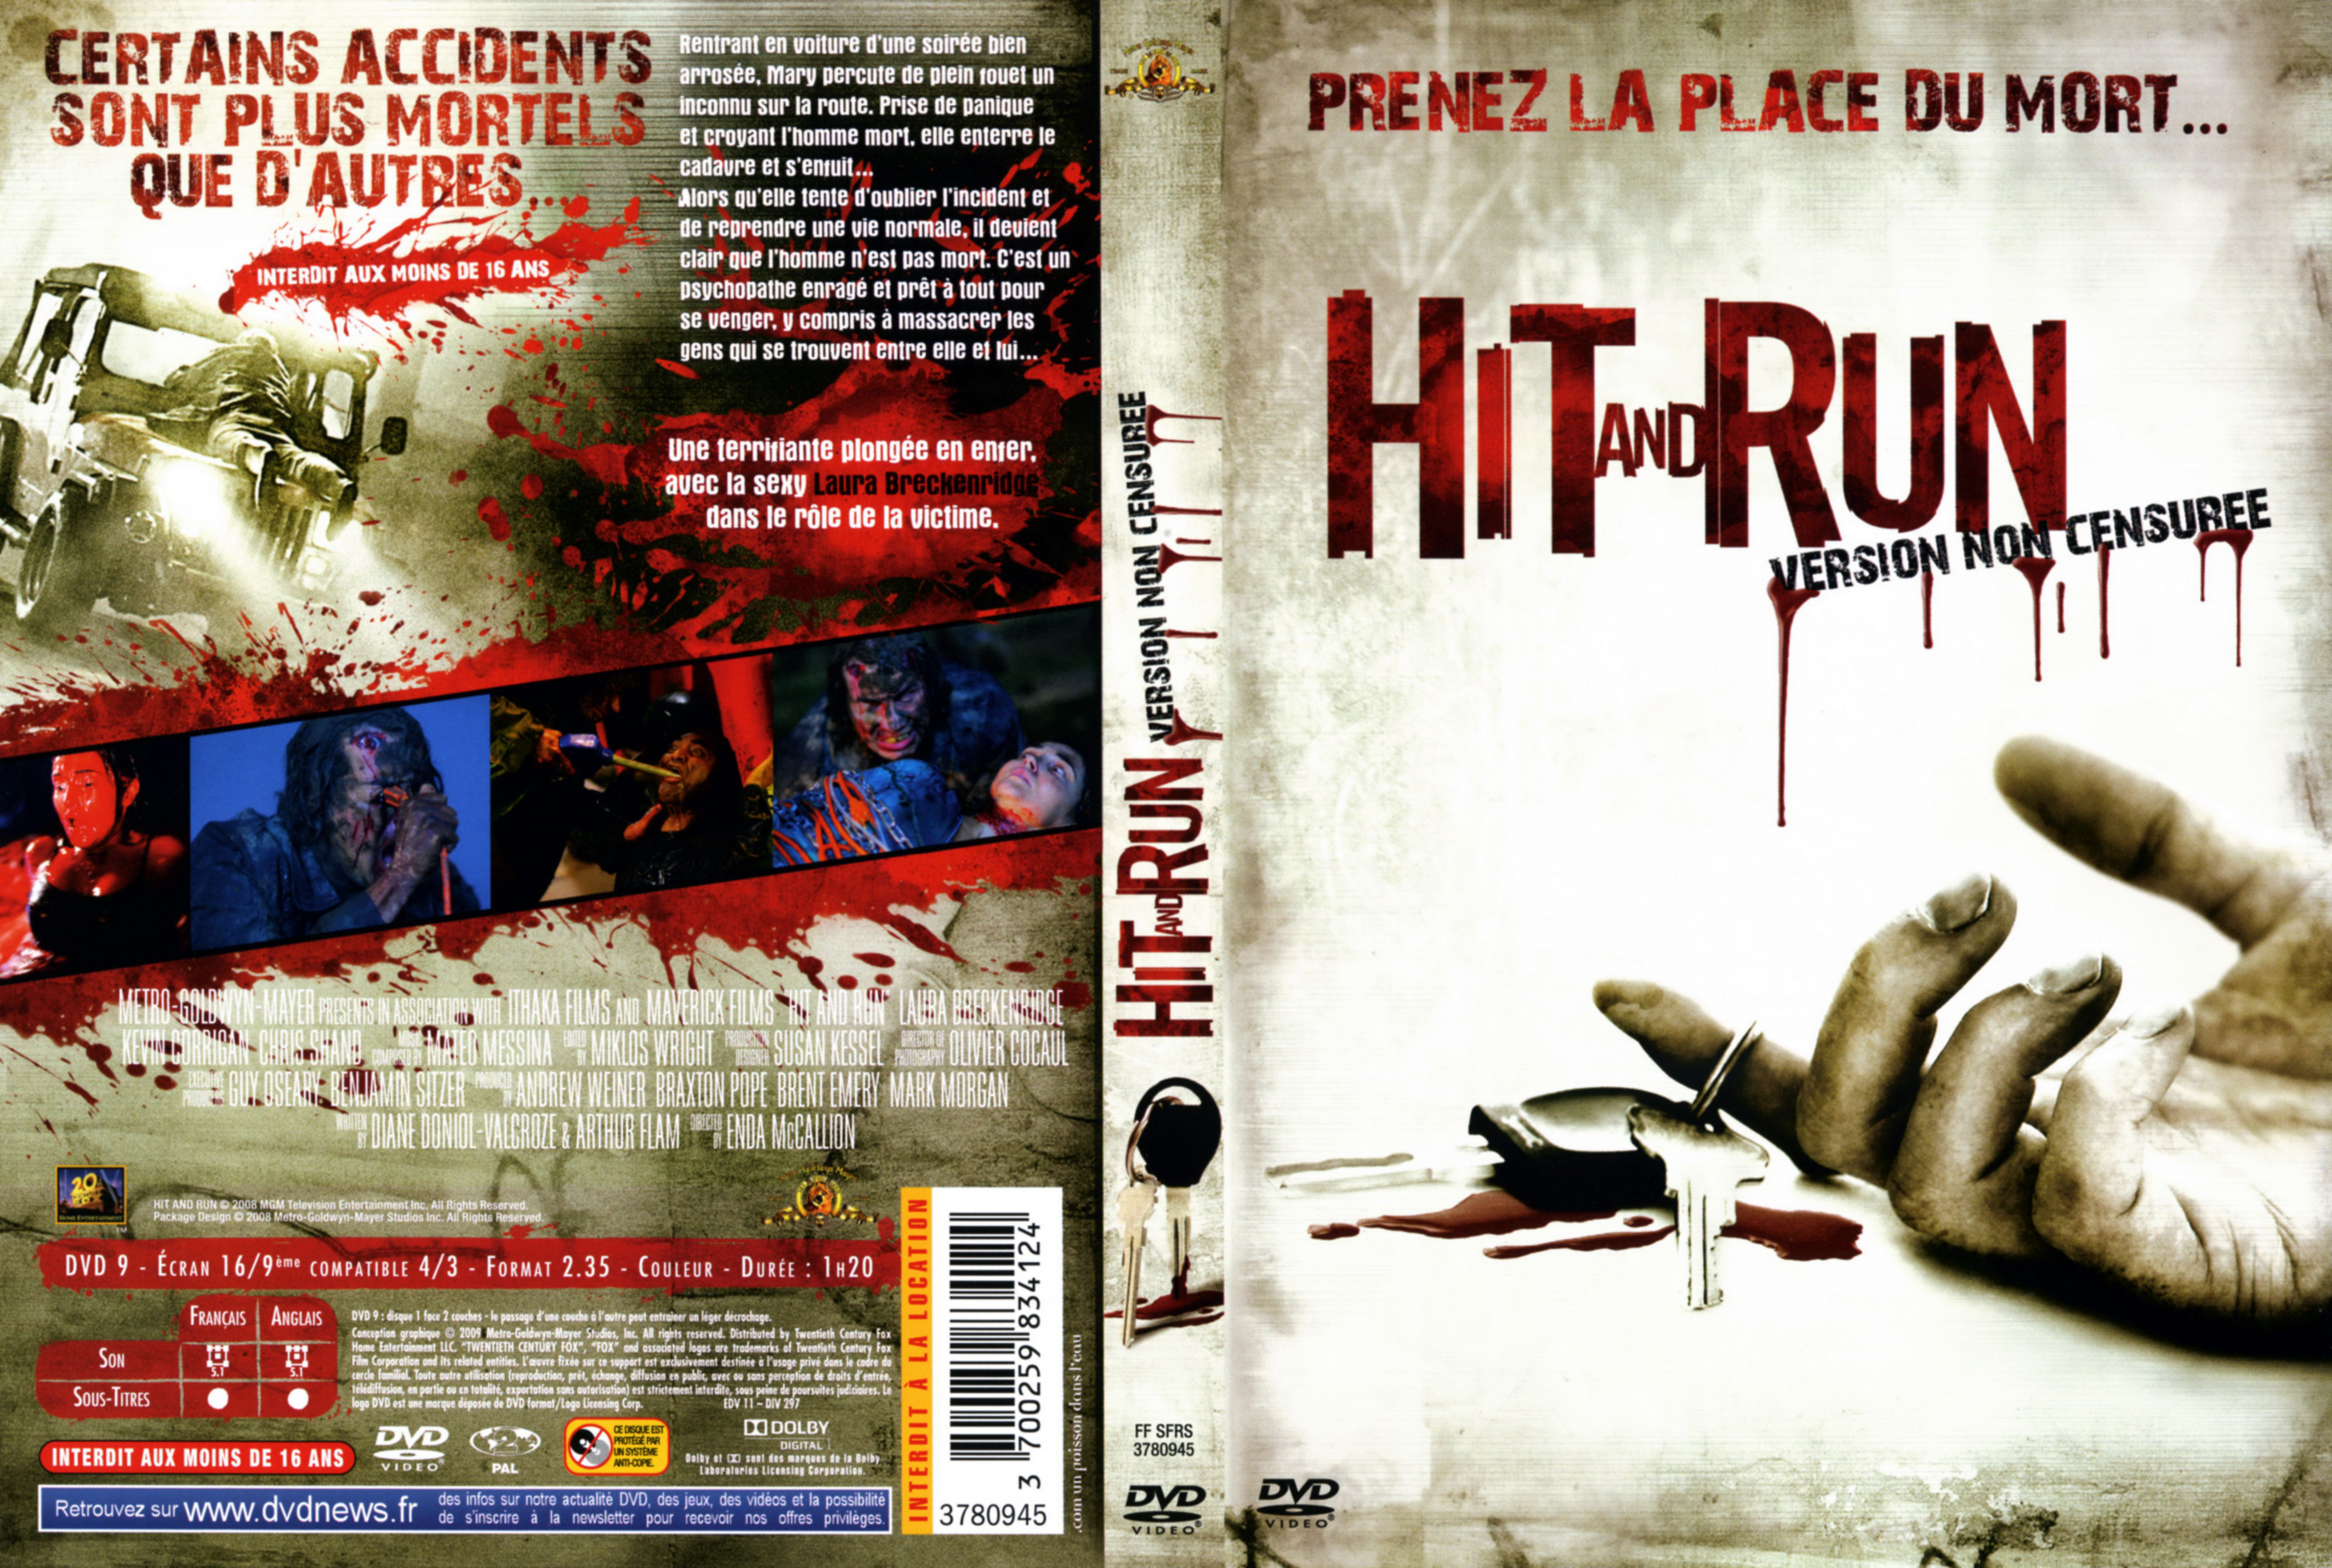 Jaquette DVD Hit and run